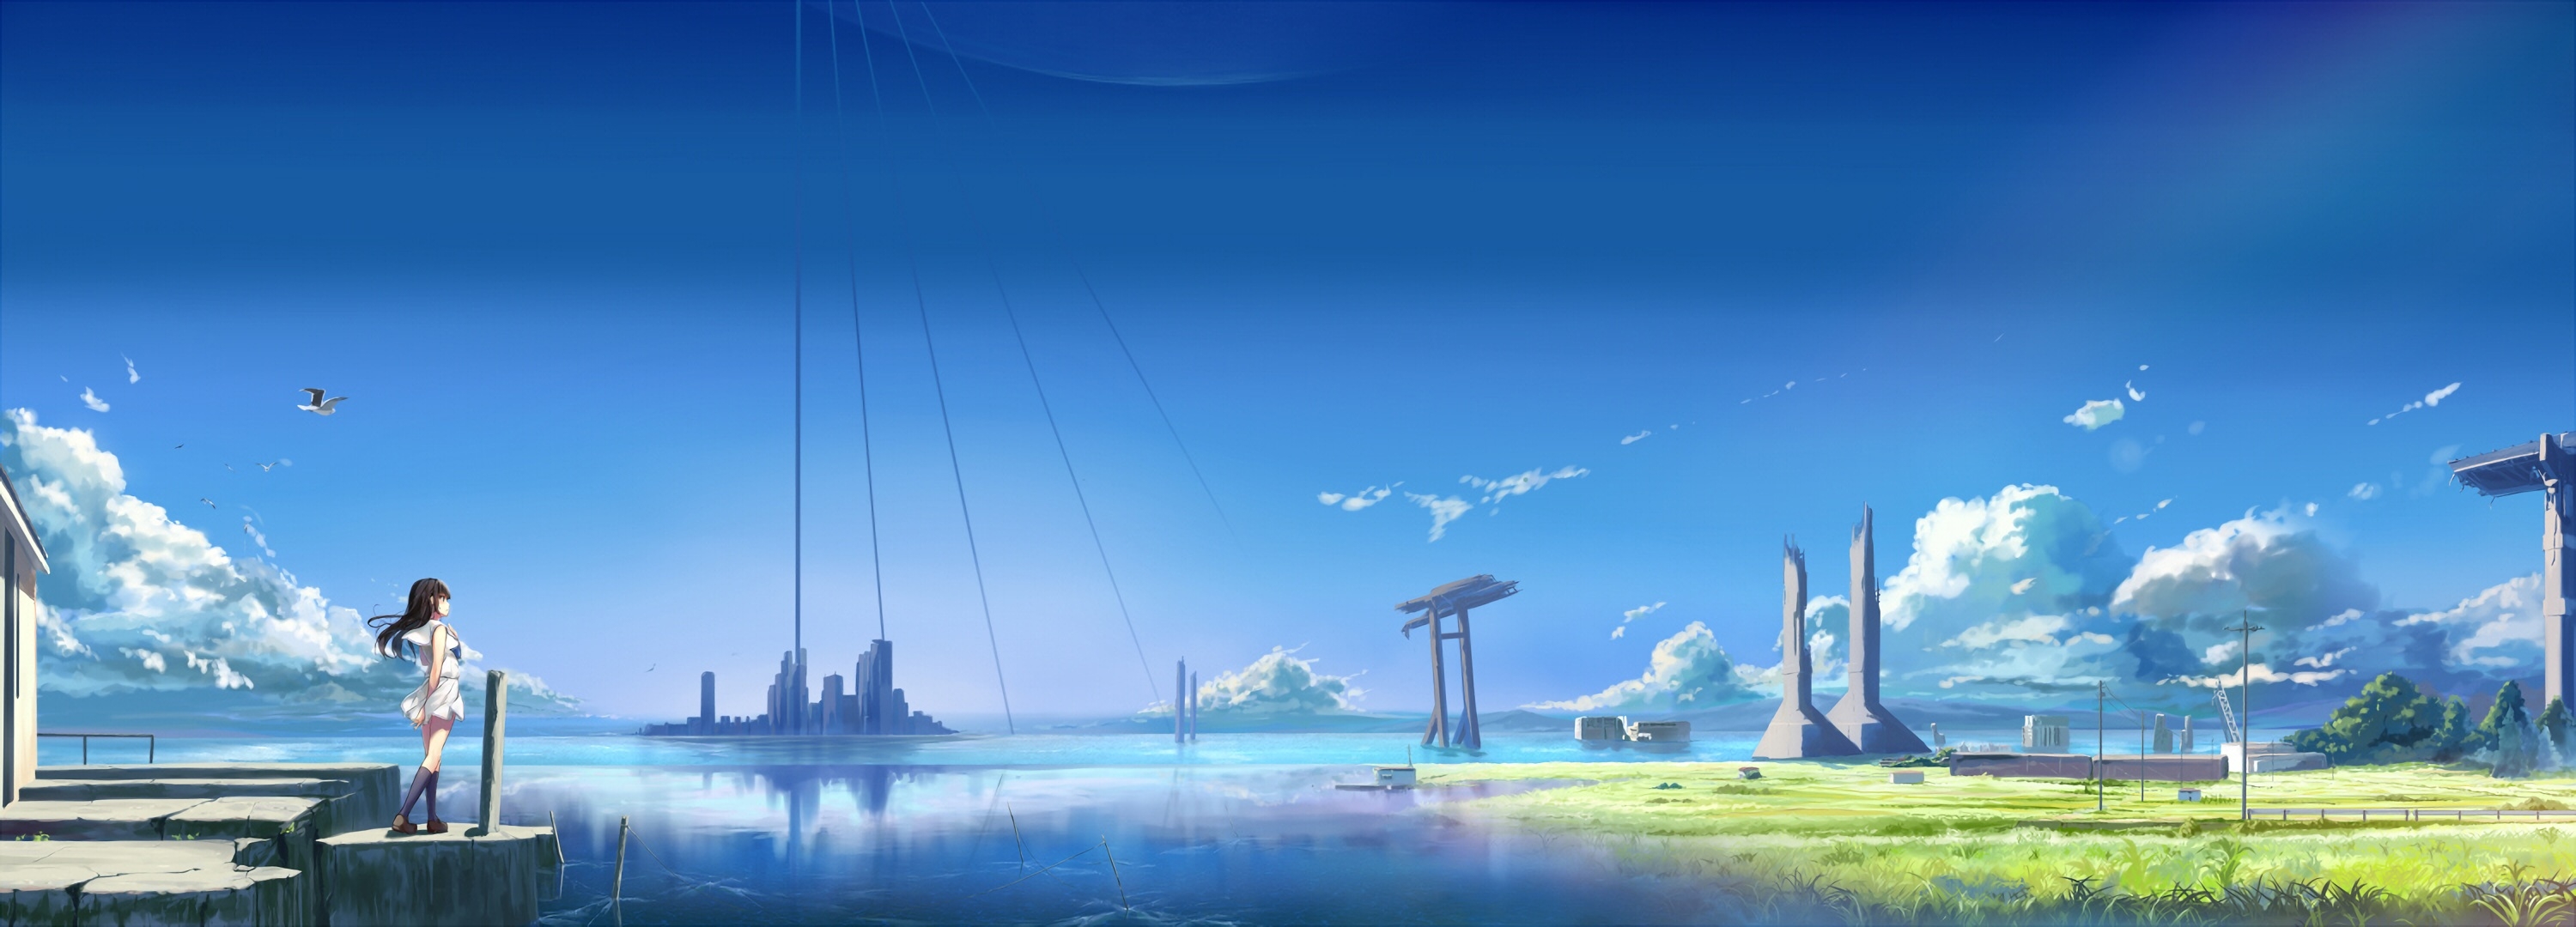 Photo wallpaper anime girl, landscape, clear skies, clouds, buildings ...